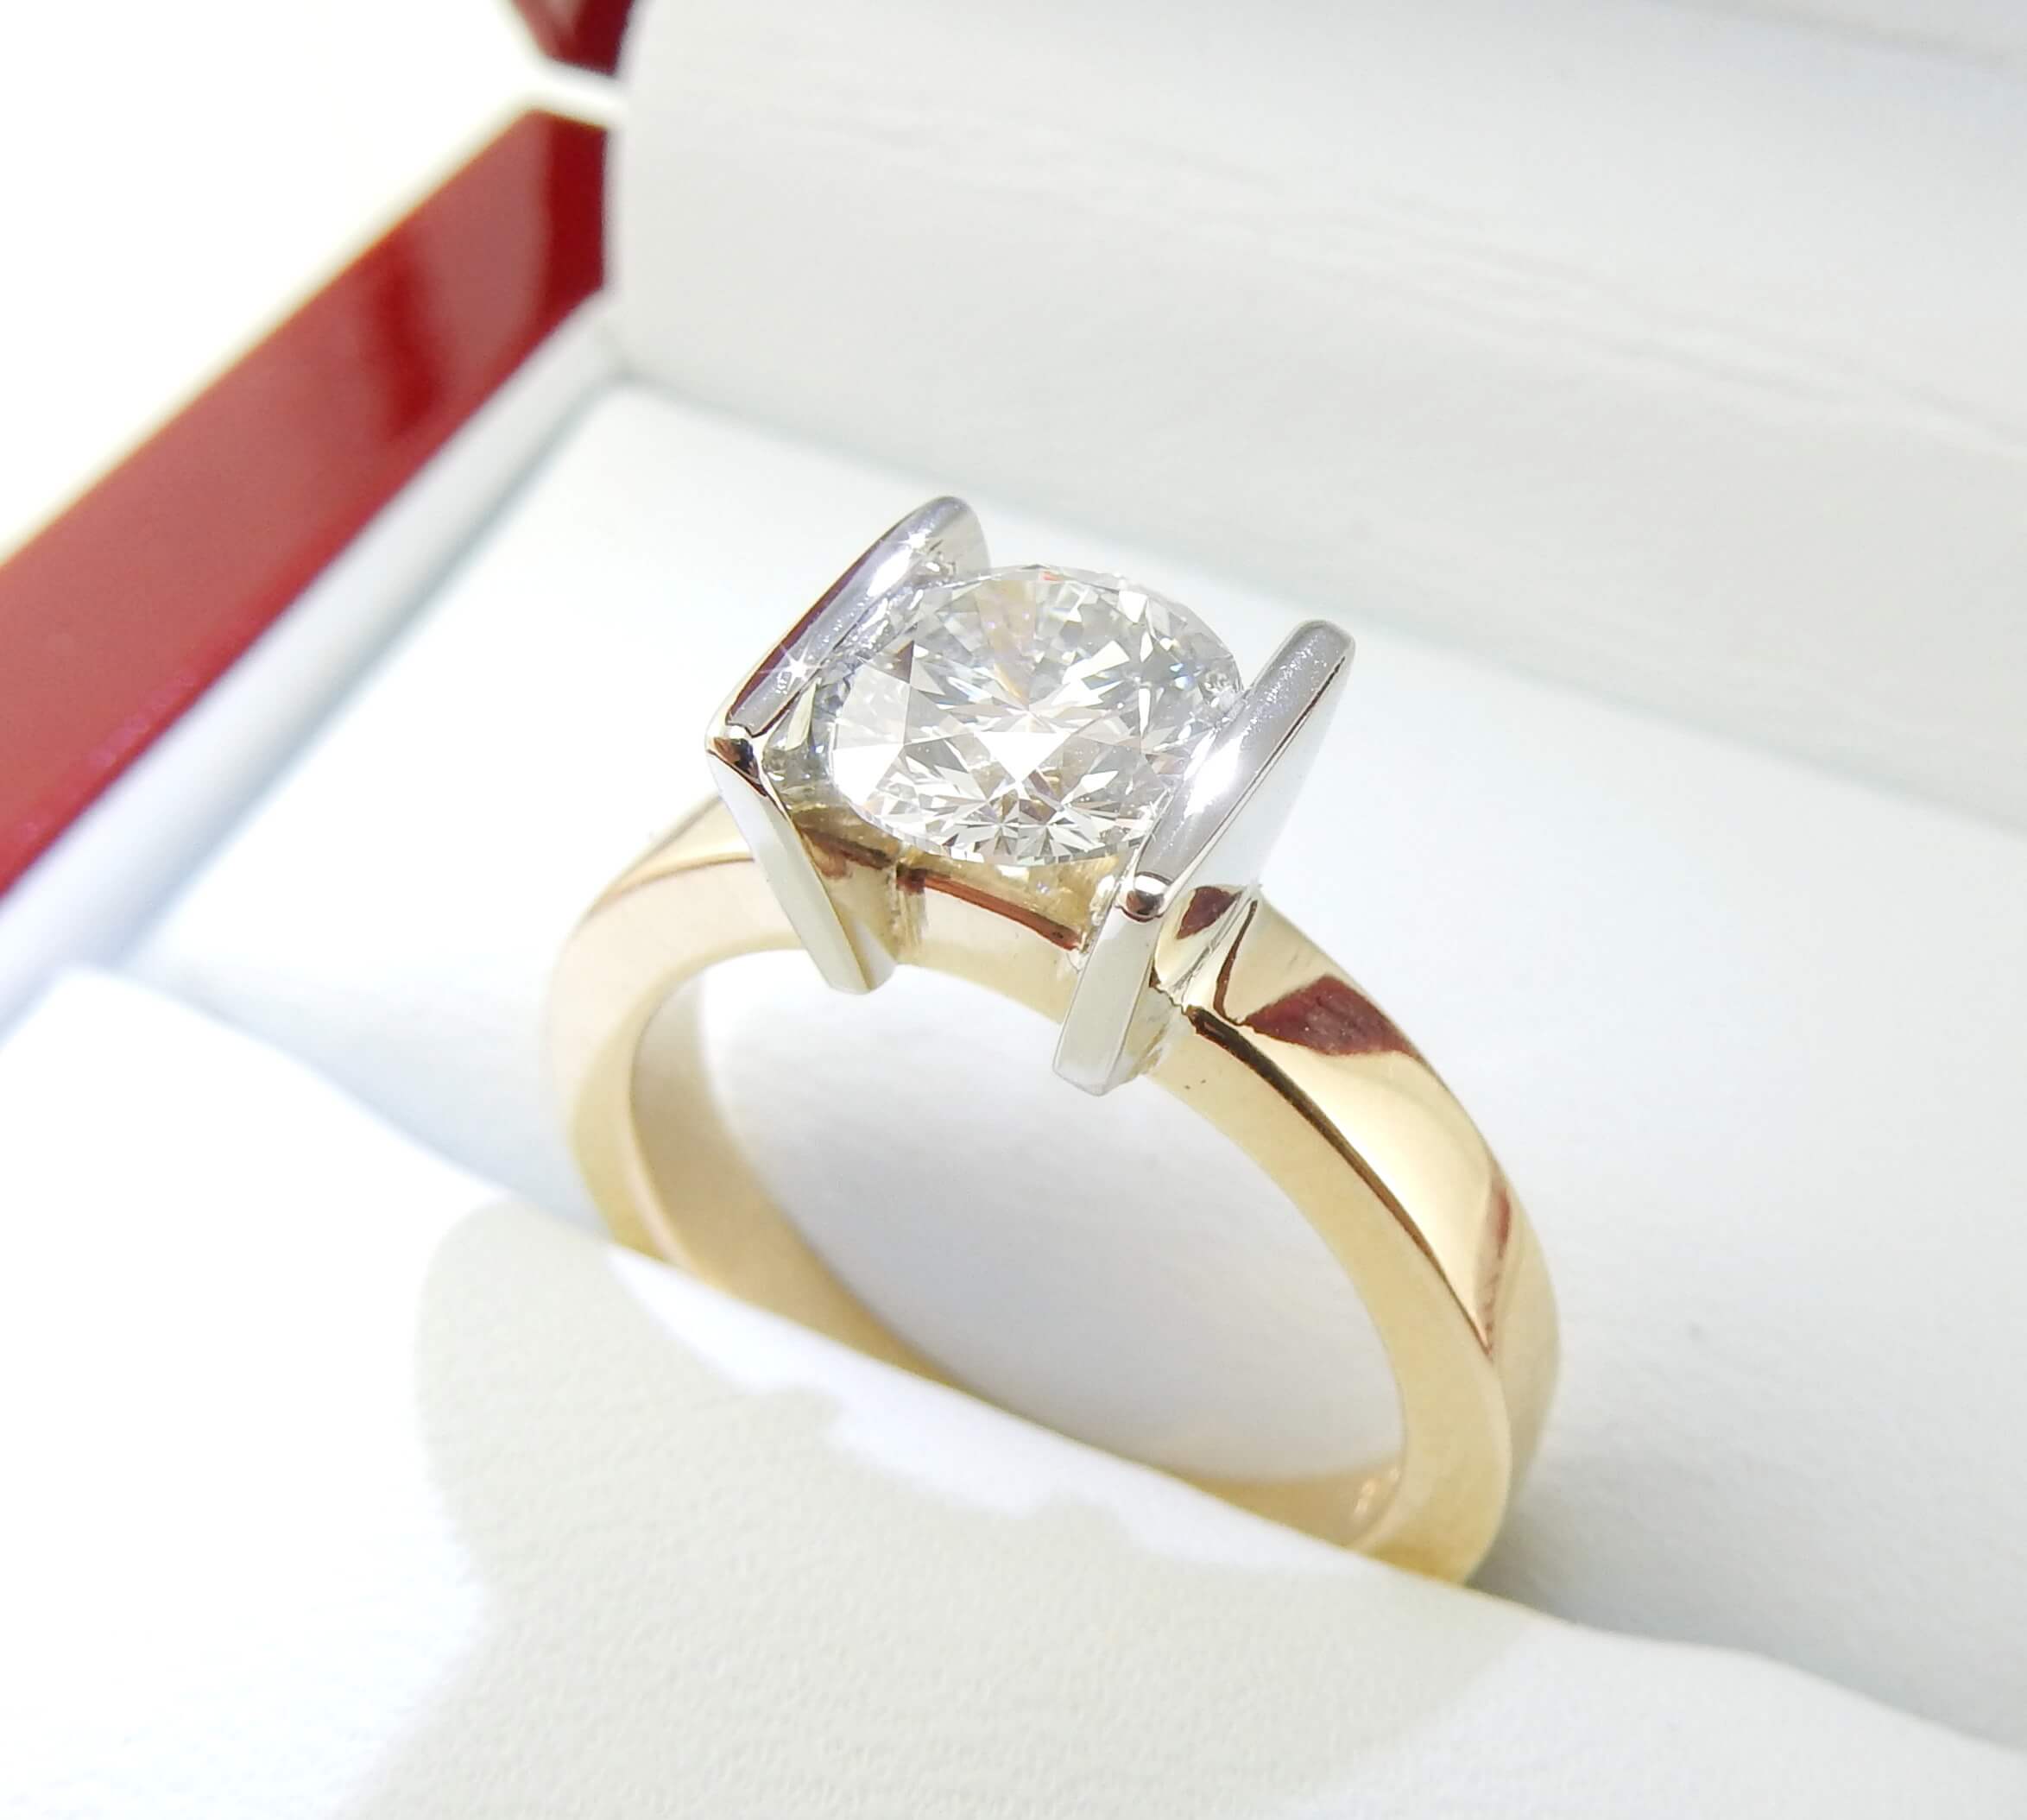 Sample Sale Ready to ship-White Sapphire Channel Tension set Engagement Ring,  Solitaire, Thick band, 1ct, 6mm, Silver Rhodium